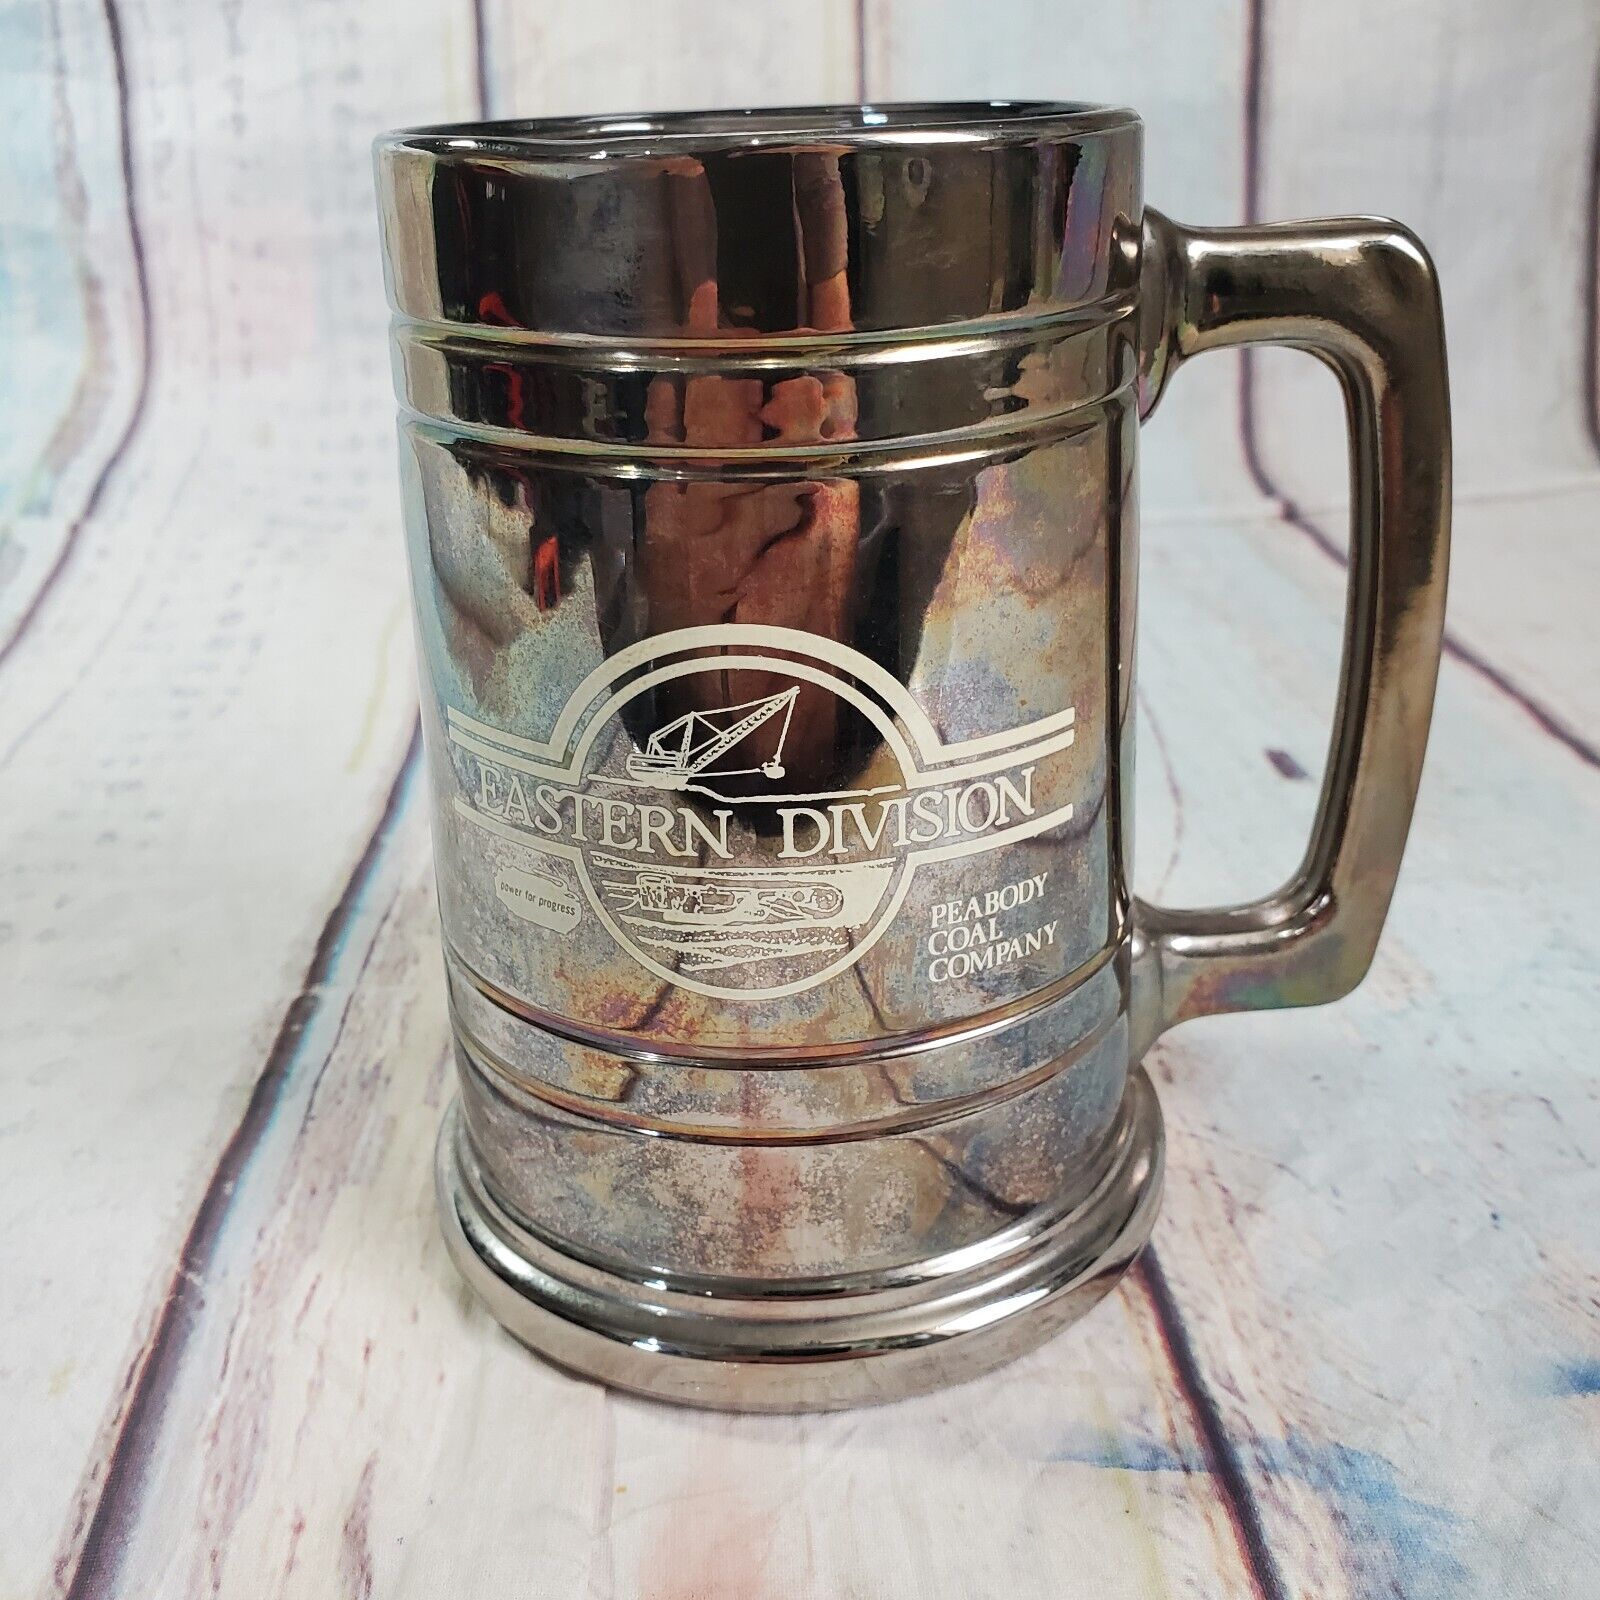 Vintage 1982 Peabody Coal Company Eastern Division Stein